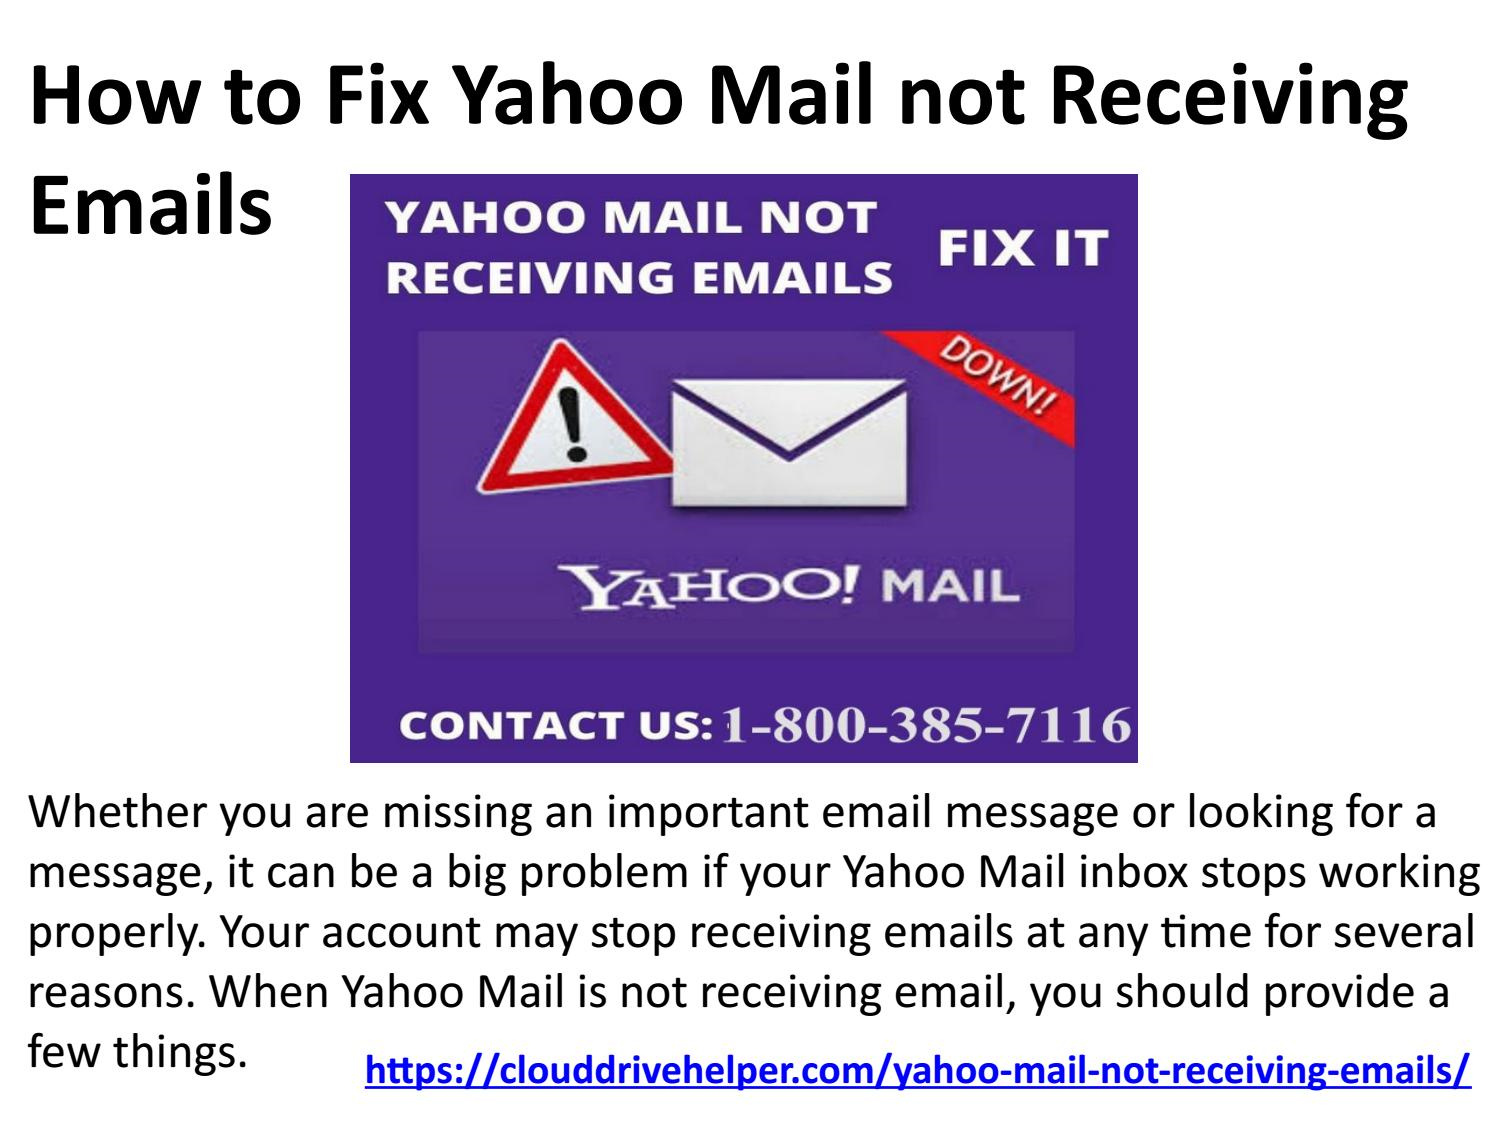 how to fix it when yahoo mail is not receiving emails